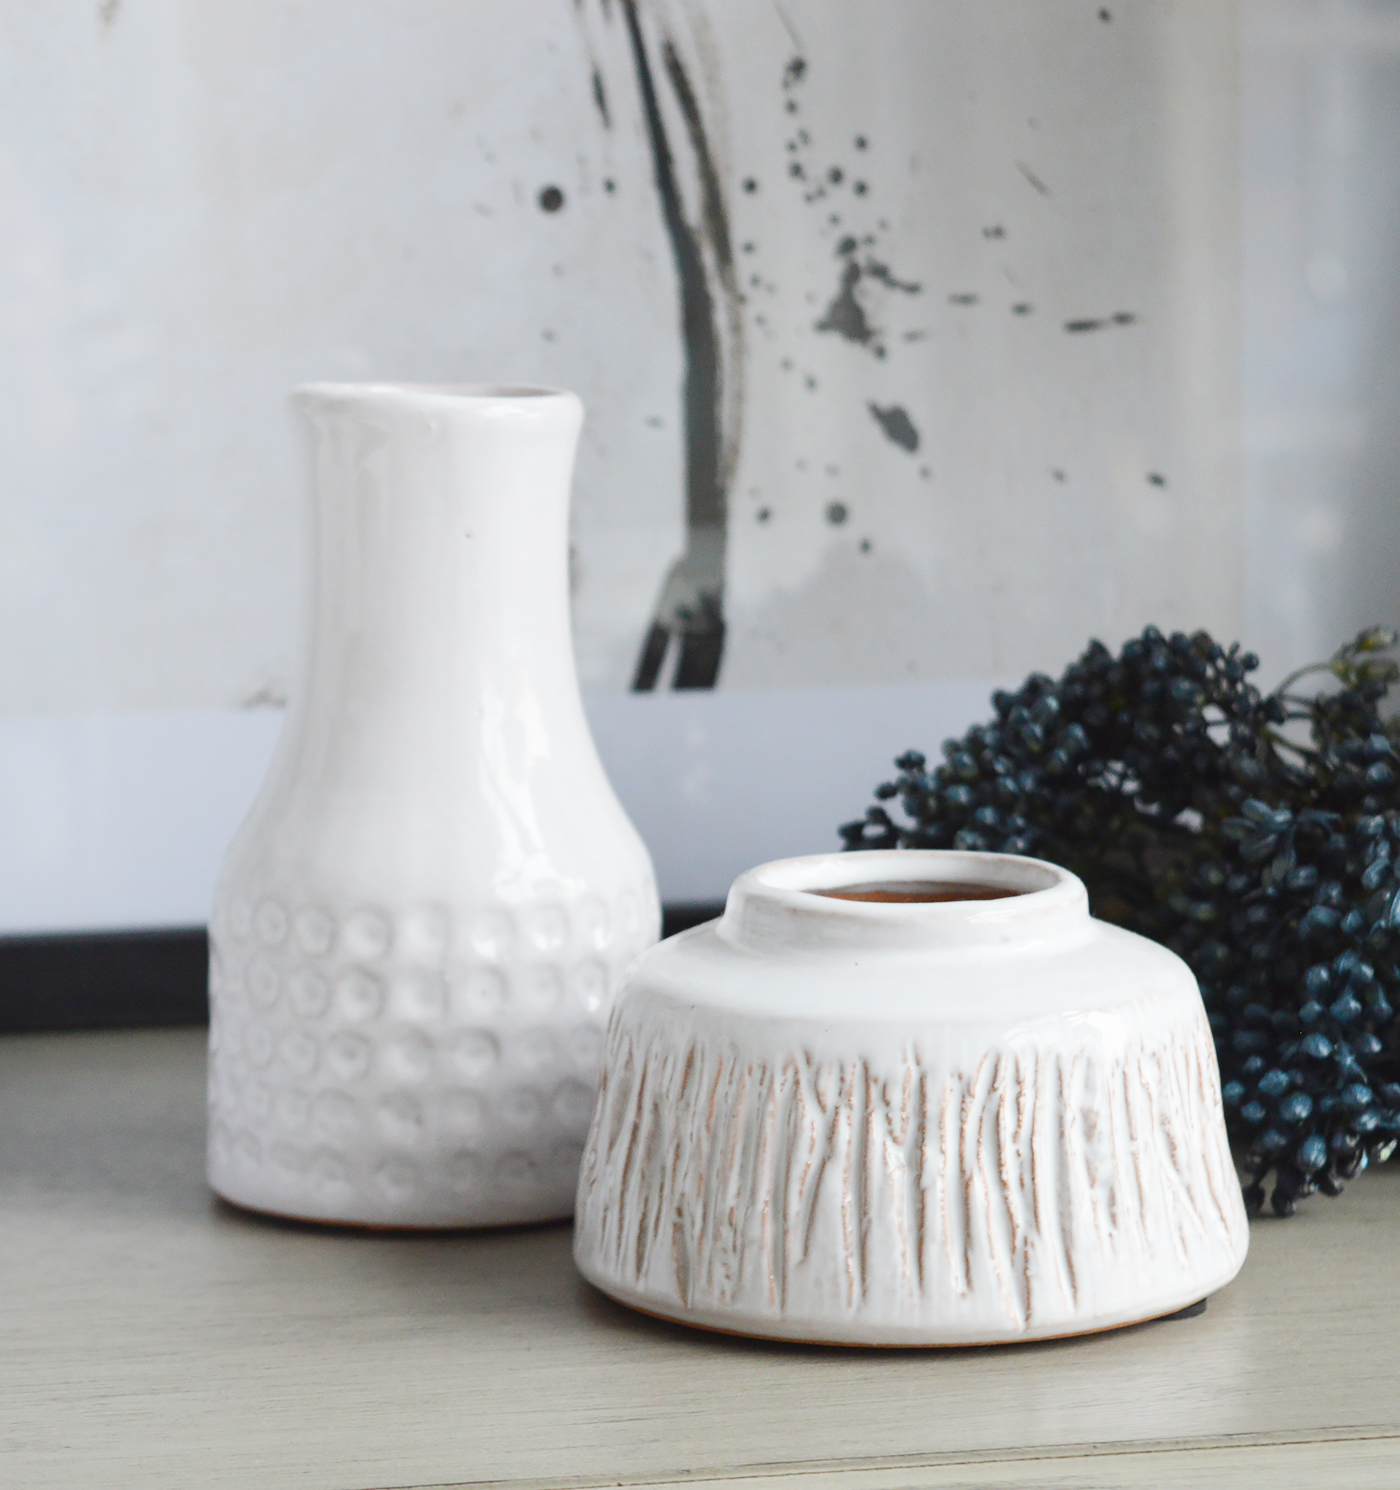 Harmony White Terracotta Vases - New England Coastal, Country and Farmhouse furniture and Interiors